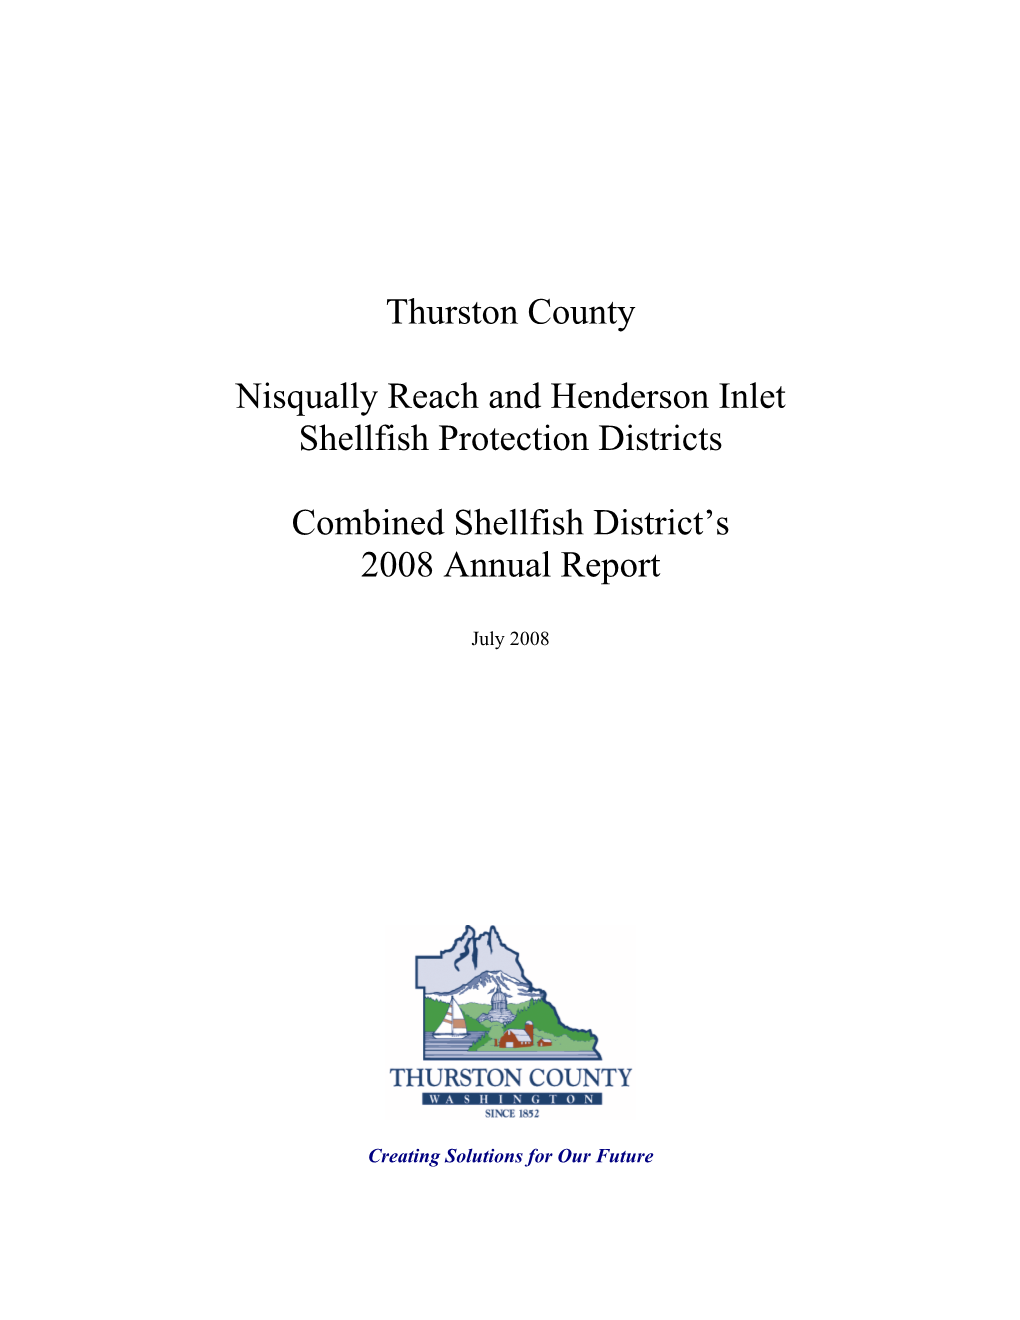 Nisqually Reach and Henderson Inlet Shellfish Protection Districts